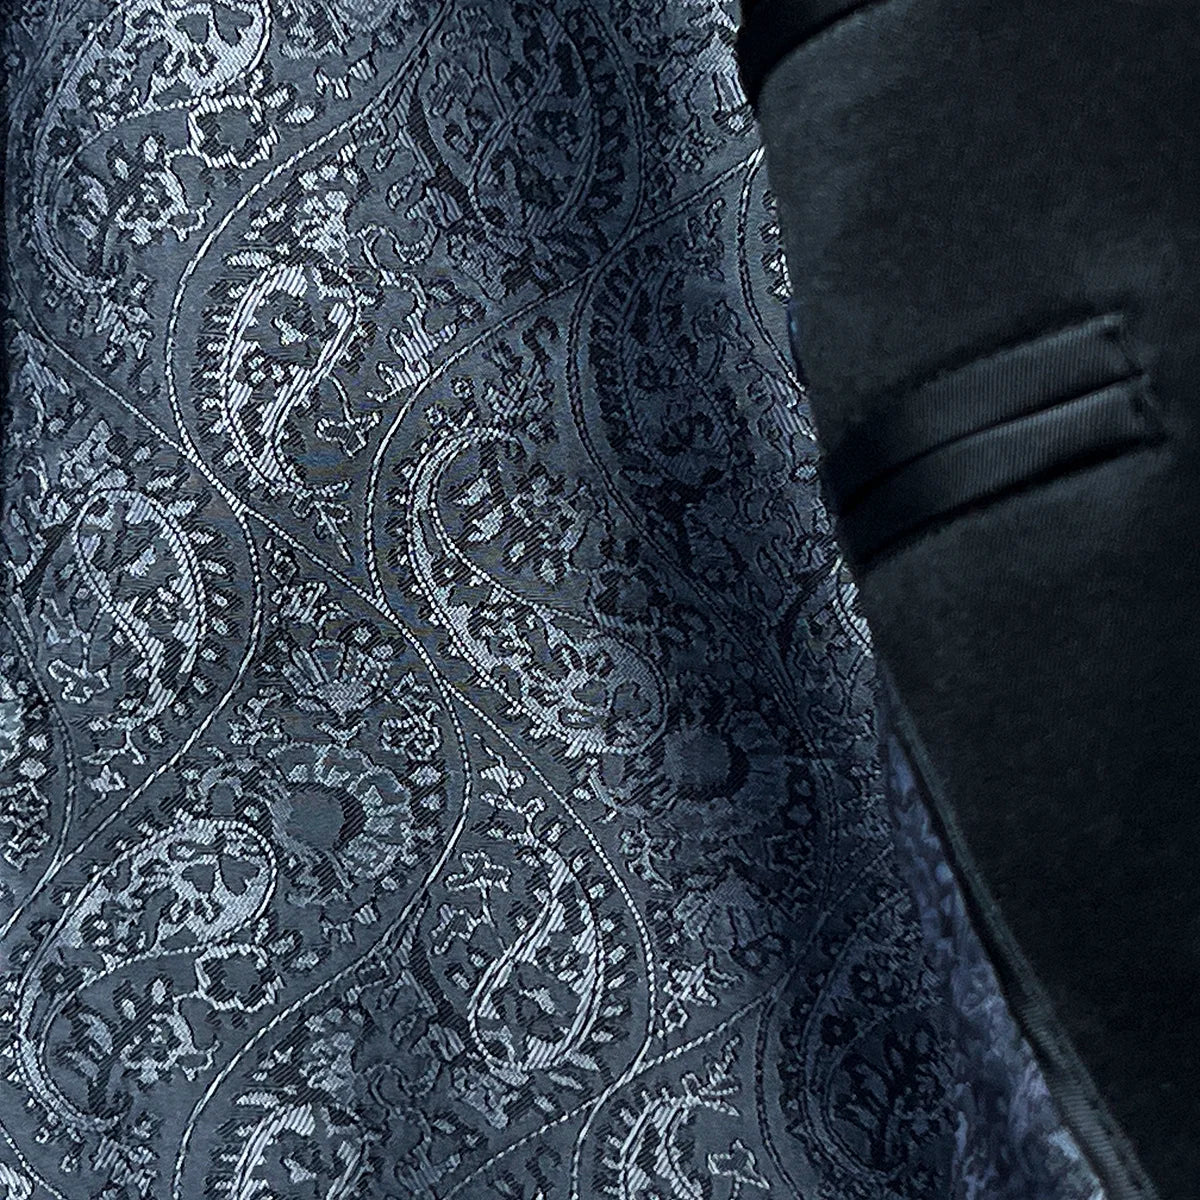 Image of the tuxedo jacket with flash linings, showing the contrast between the navy blue plain fabric and silver paisley lining.